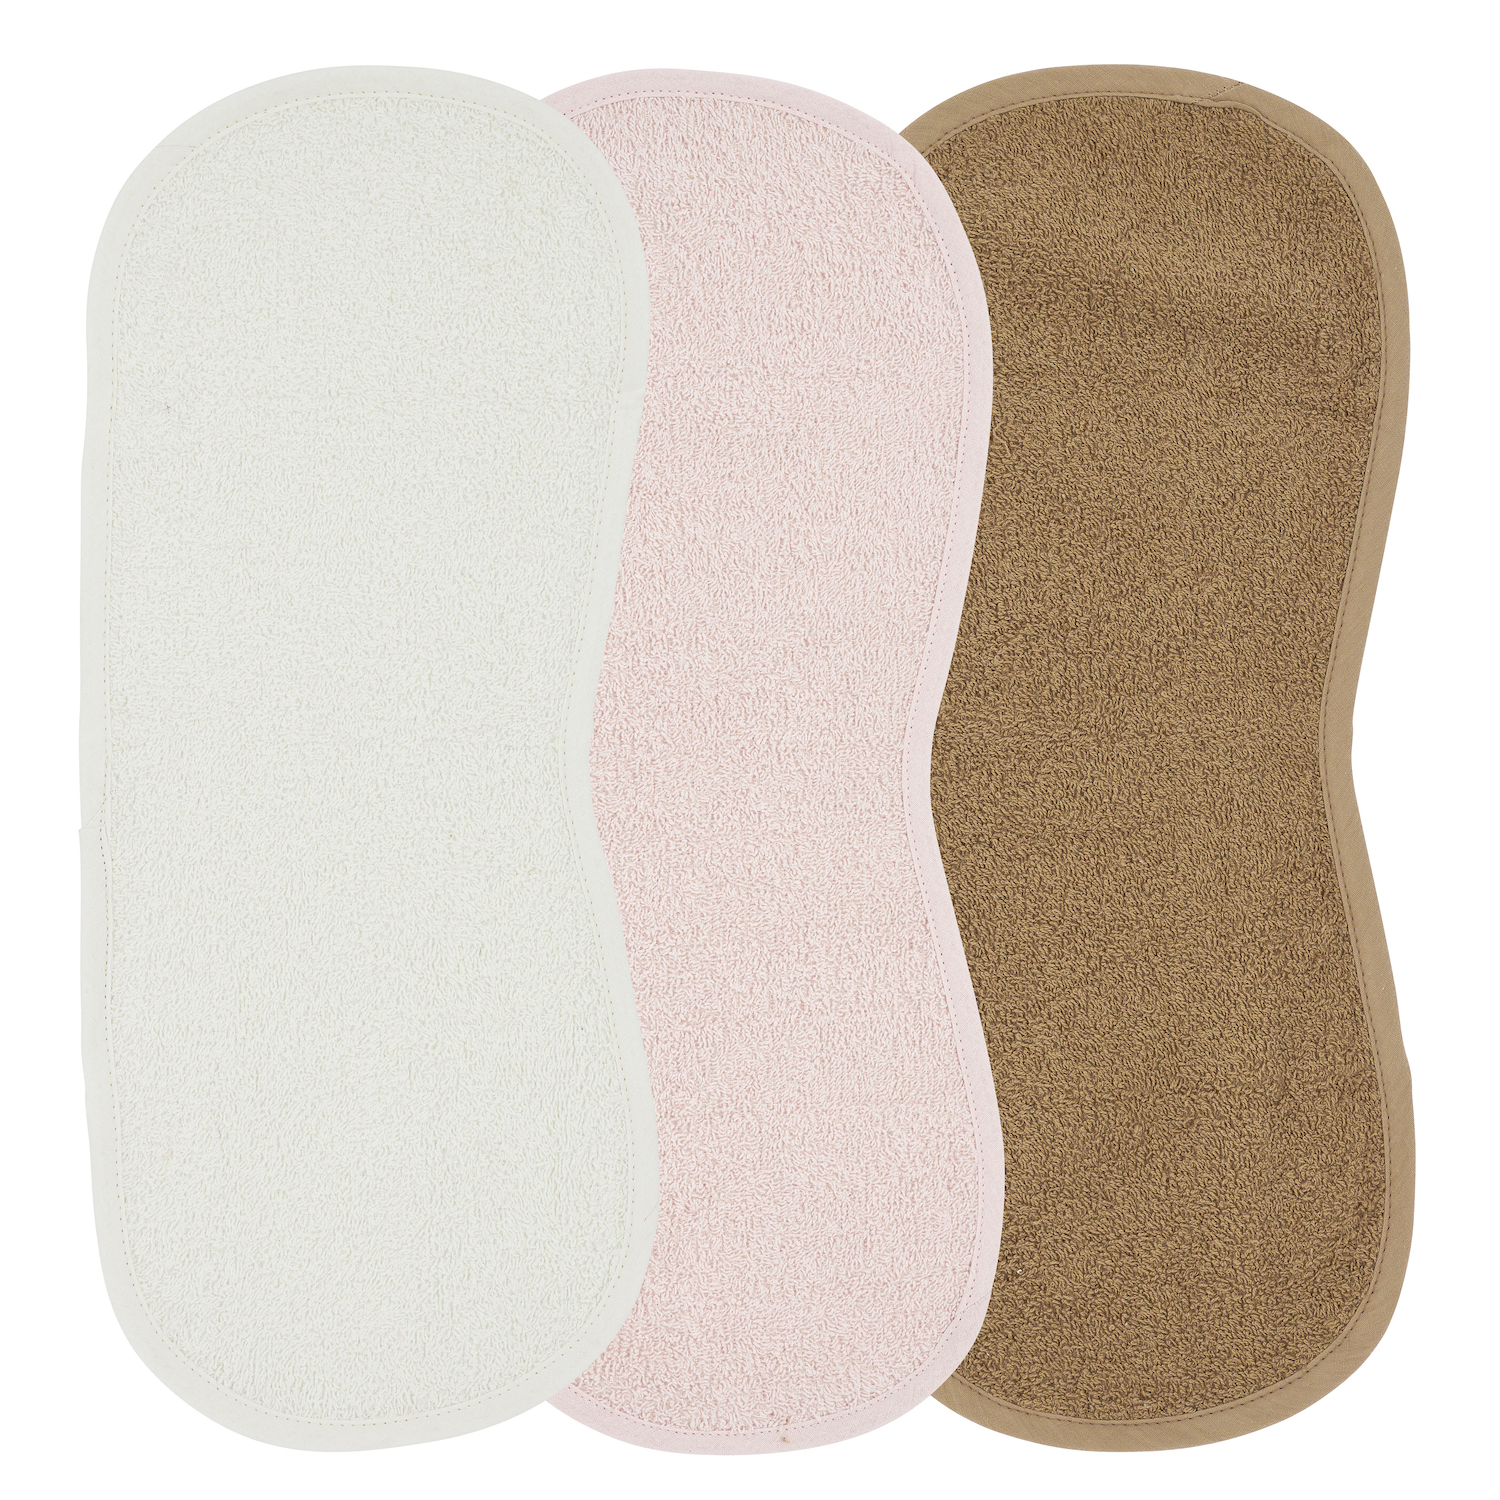 Burb cloth 3-pack terry Uni - offwhite/soft pink/toffee - 53x20cm